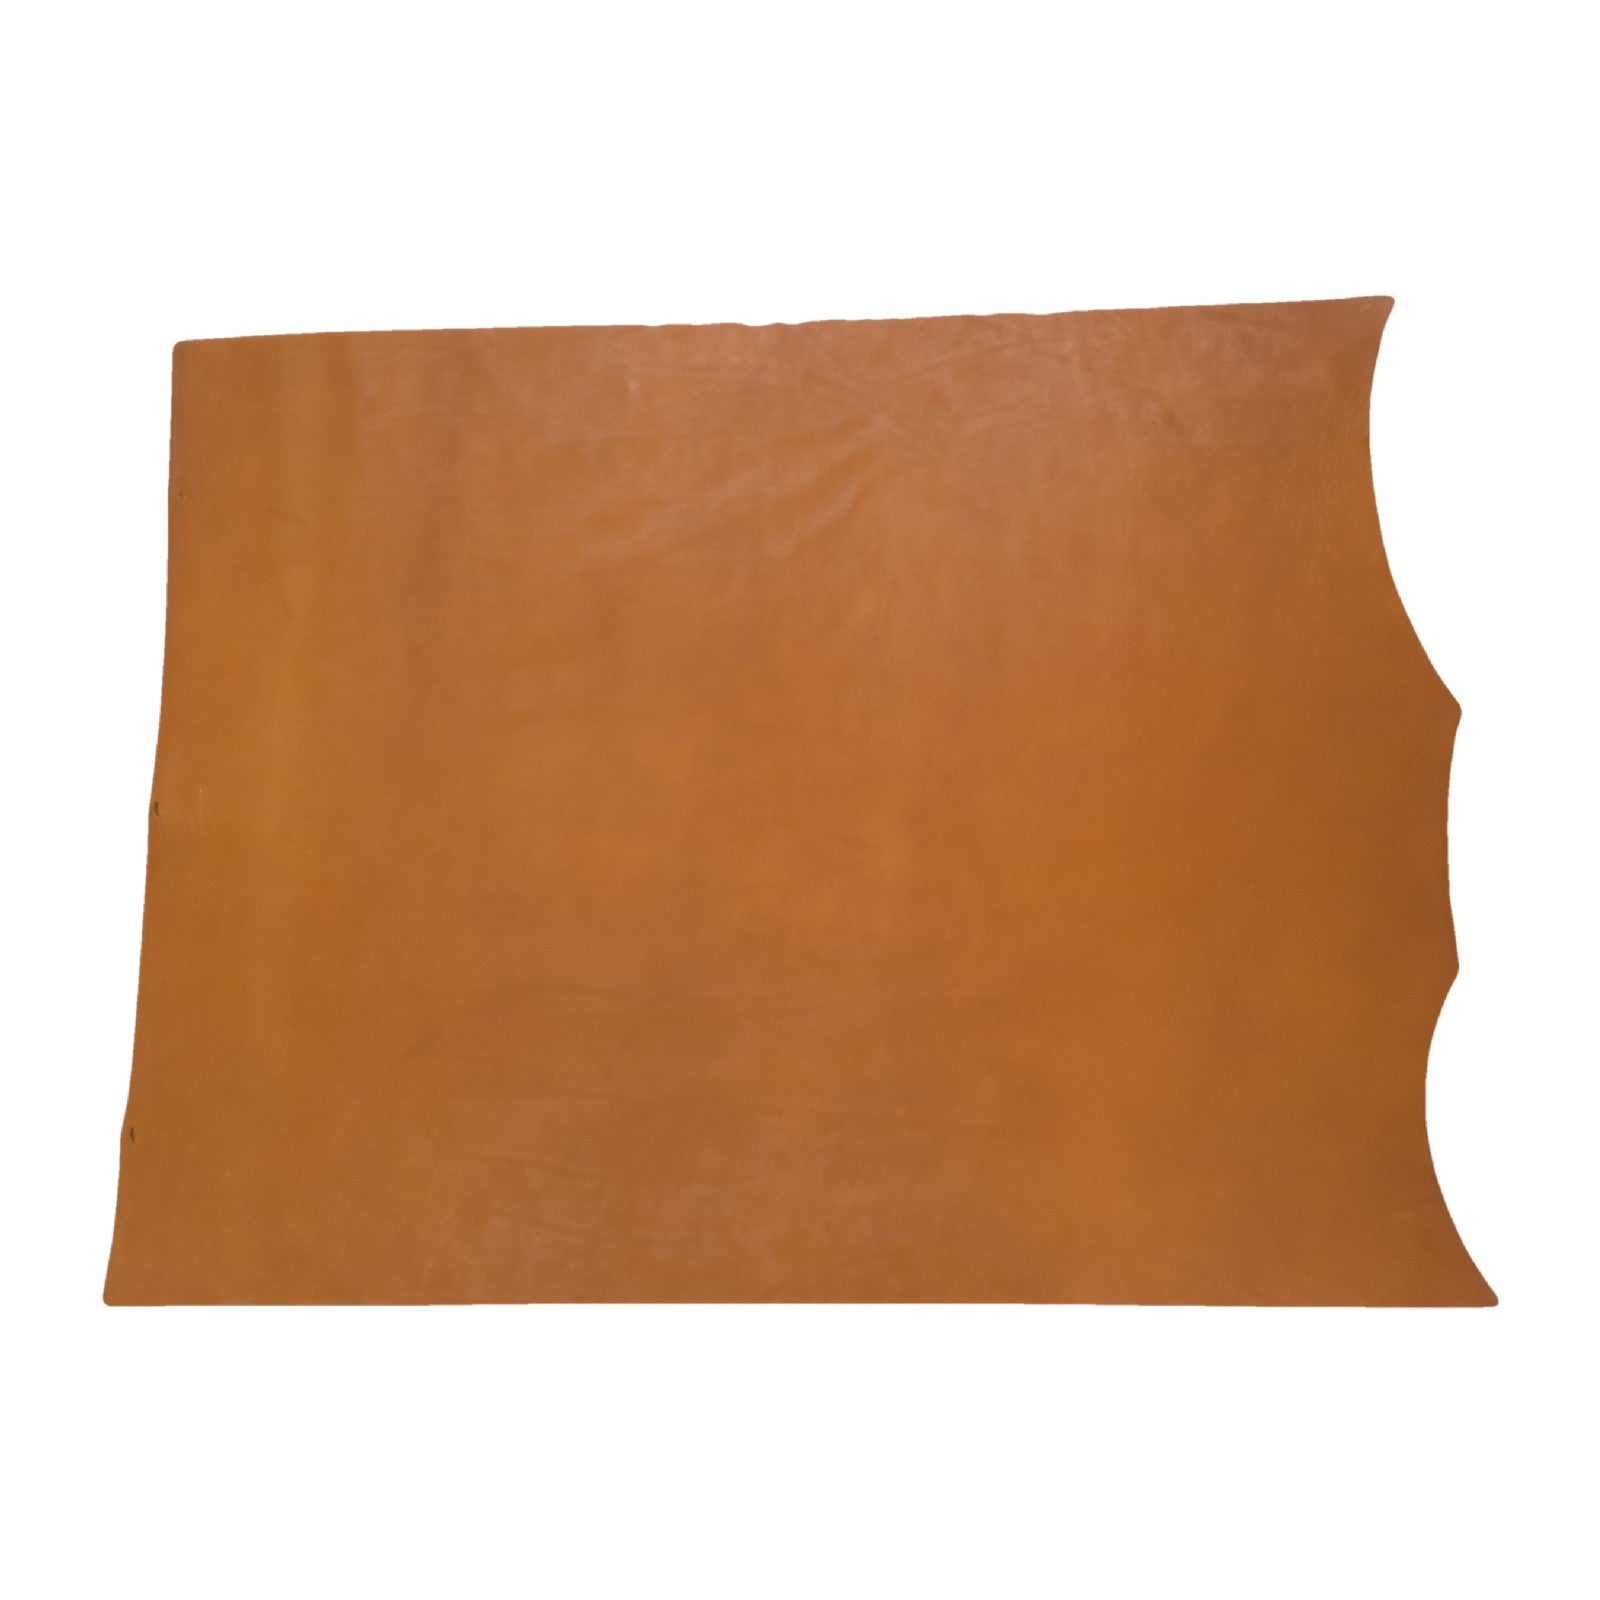 Tawny Brown, 8-9 oz, 6.5-7.5/18-23 Sq Ft Sole Veg Tan Sides & Pieces, 6.5-7.5 / Project Piece (Middle) | The Leather Guy